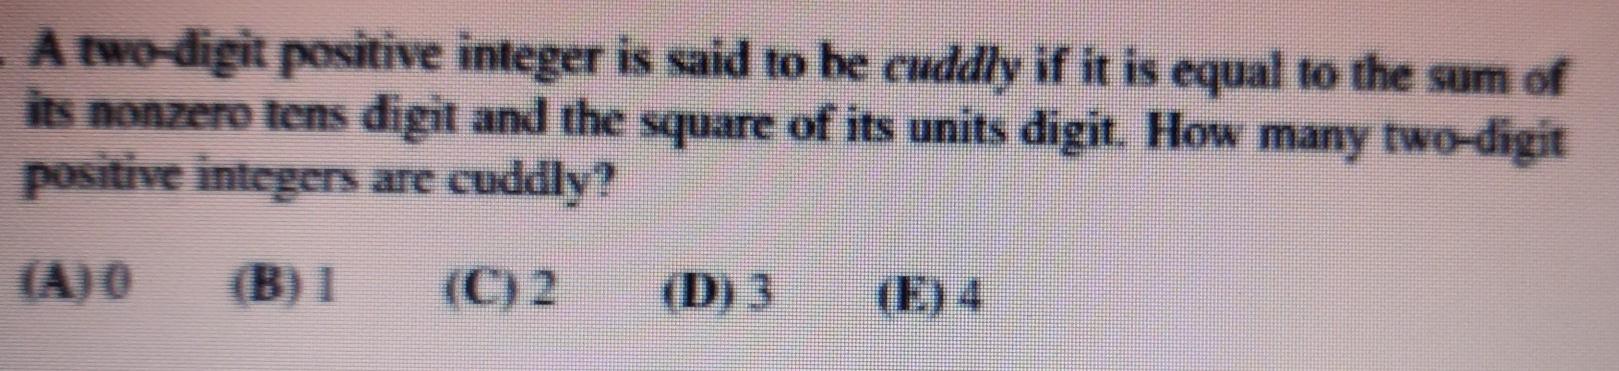 solved-a-two-digit-positive-integer-is-said-to-be-cuddly-if-chegg